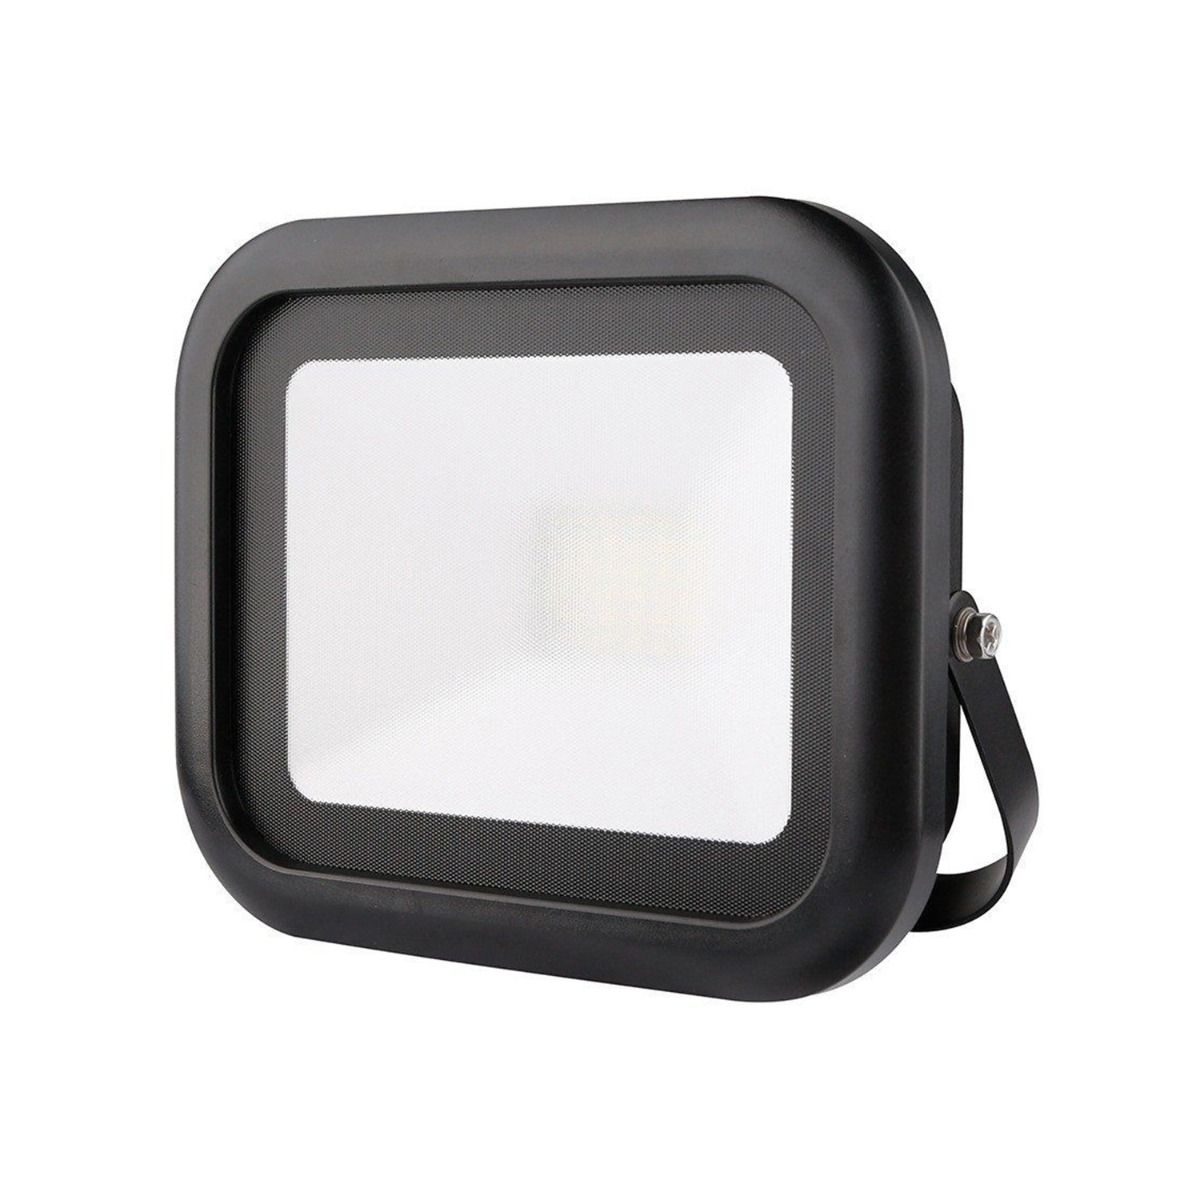 Noxion LED Floodlight Beamy V2.0 20W 4000K 1800lm IP65 | Replacer for 120W